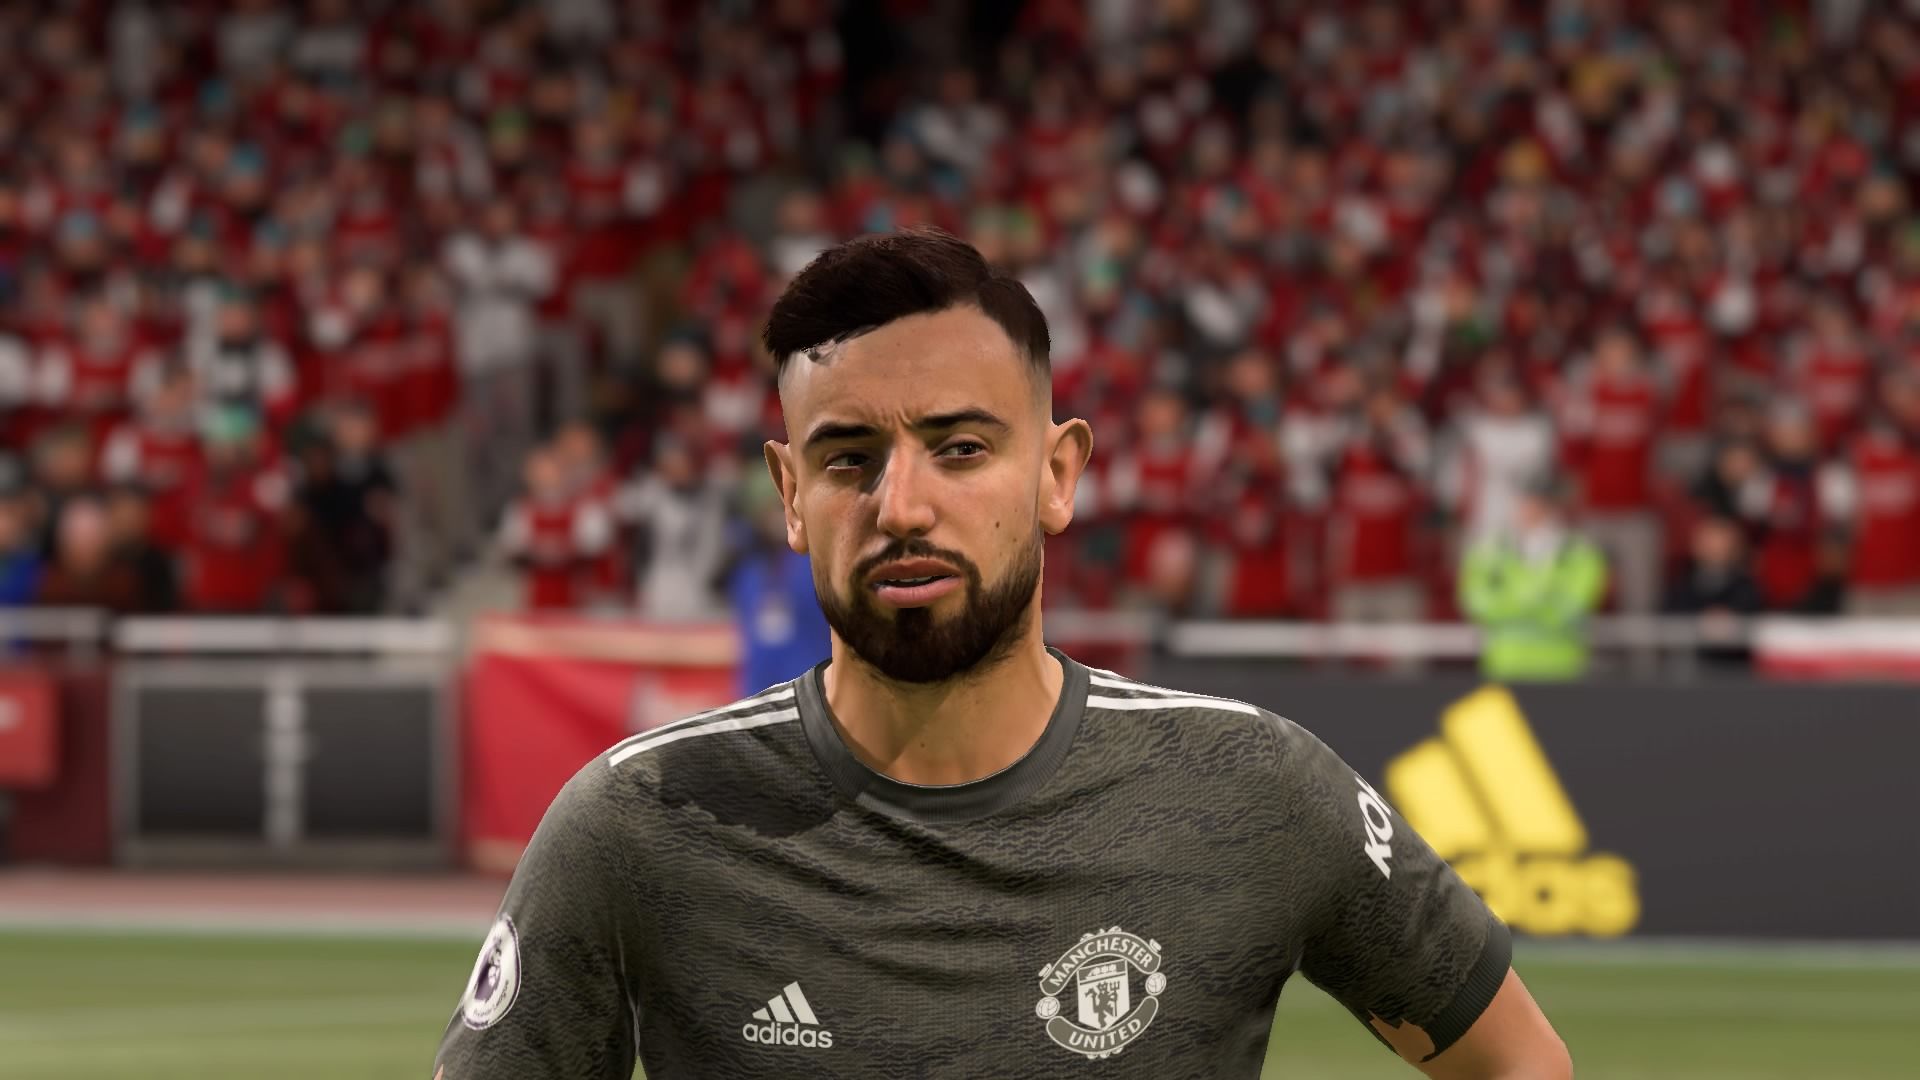 FIFA 21 player faces: the best 17 likenesses added this year